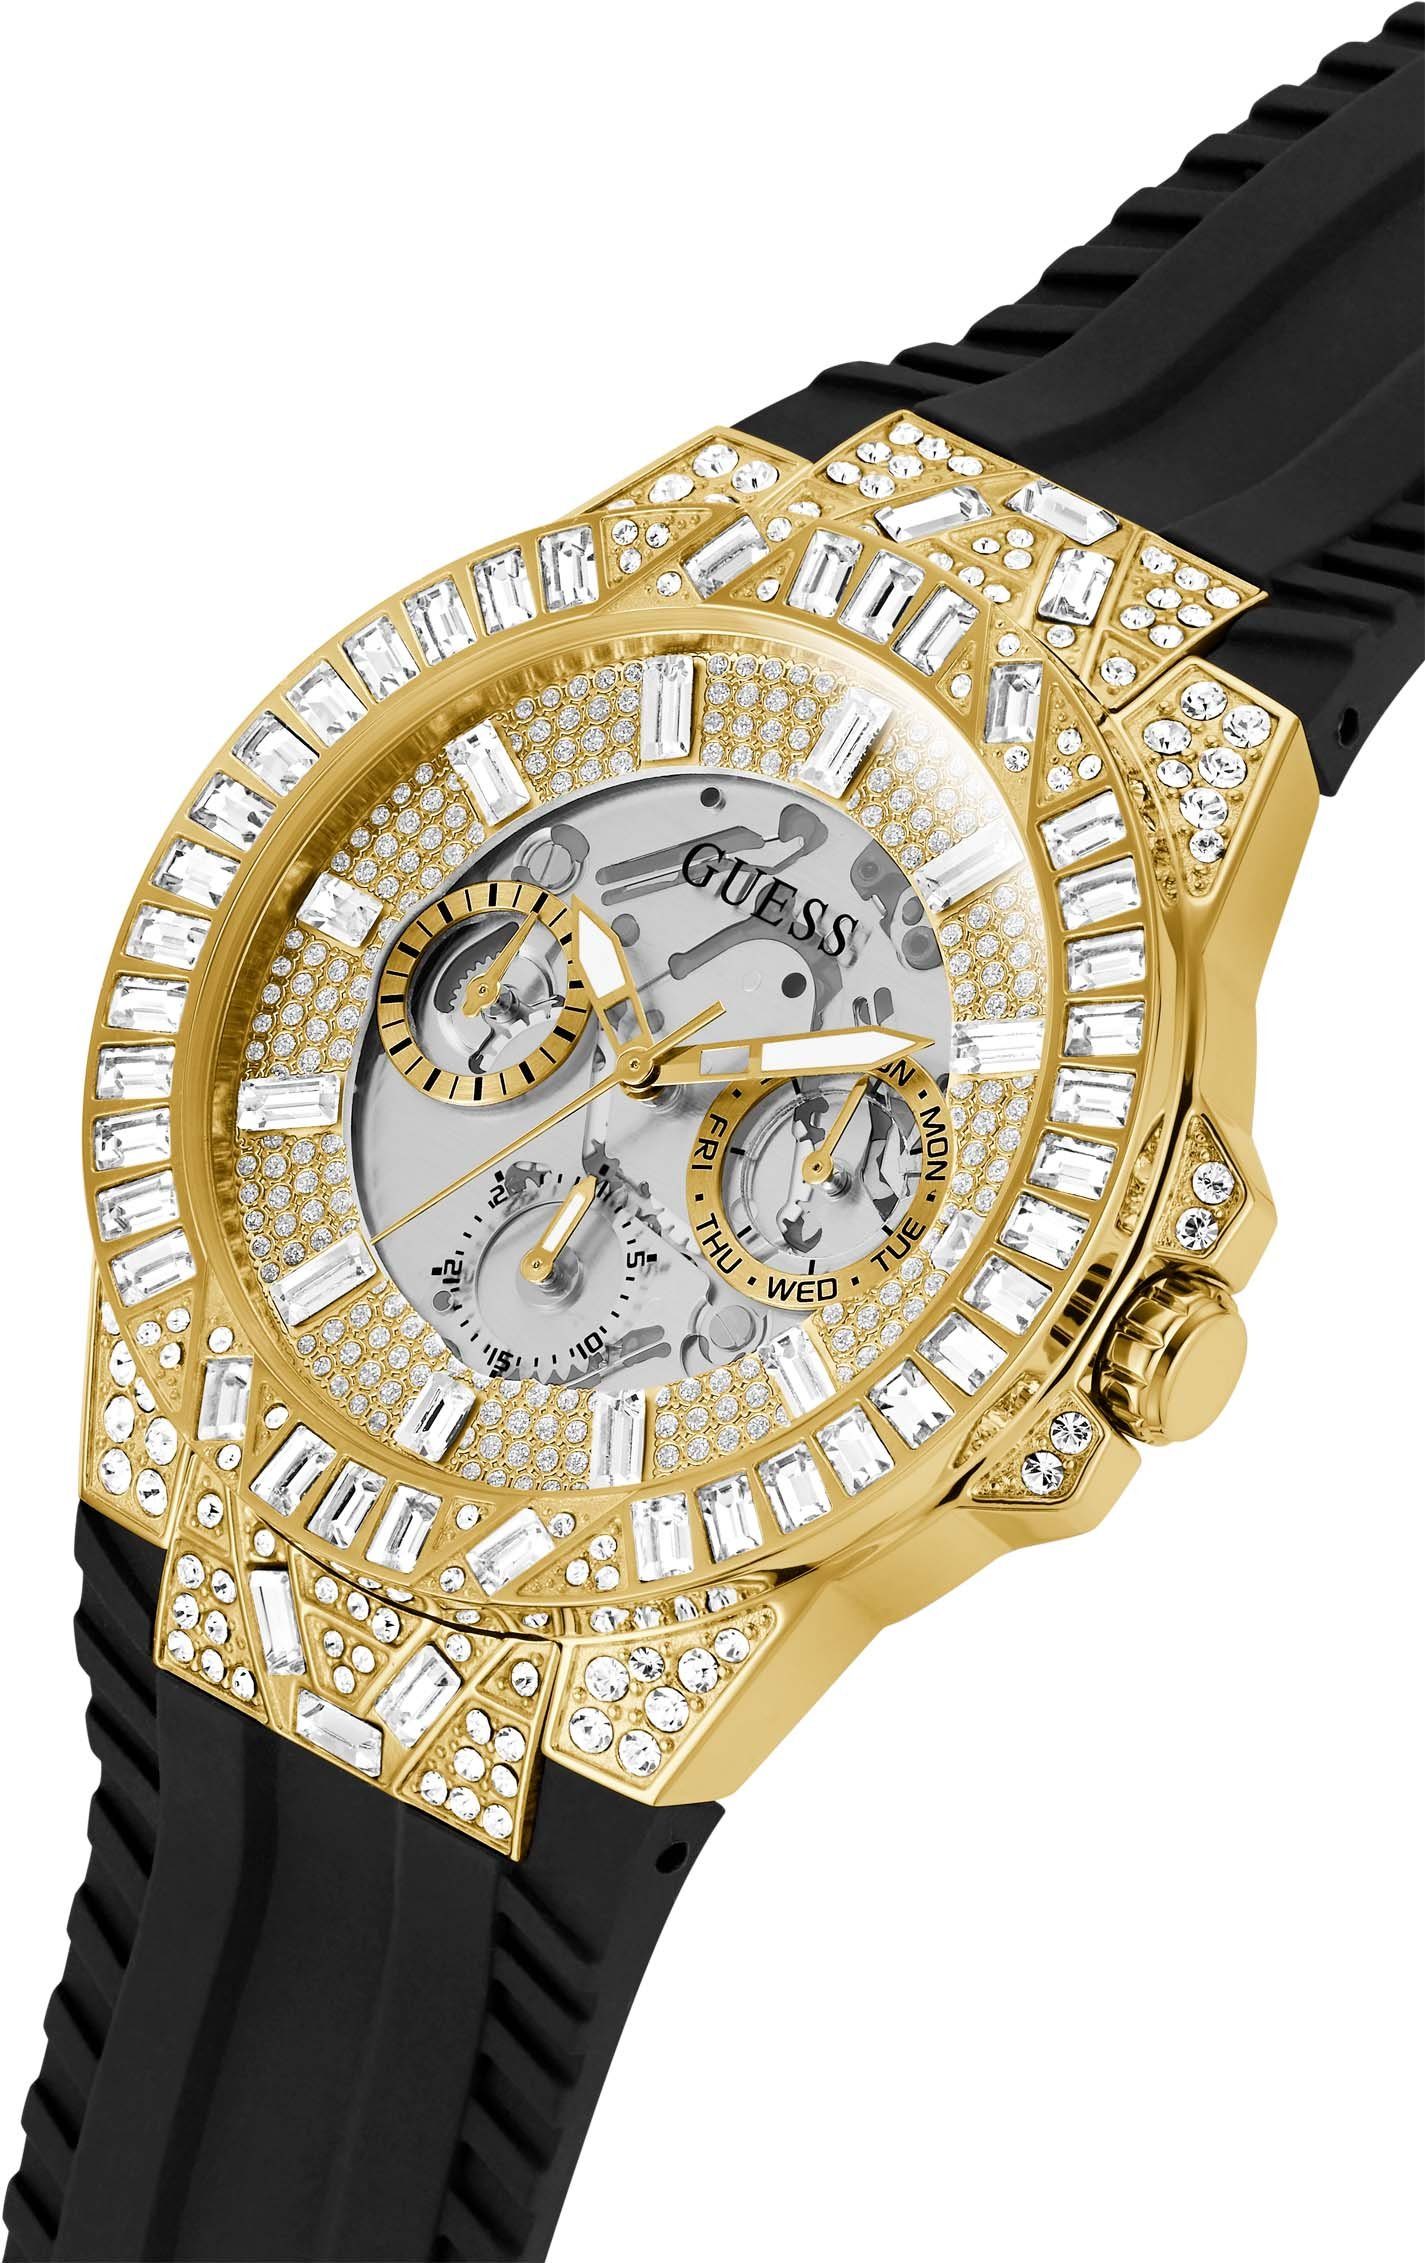 Guess Multifunktionsuhr GW0498G2